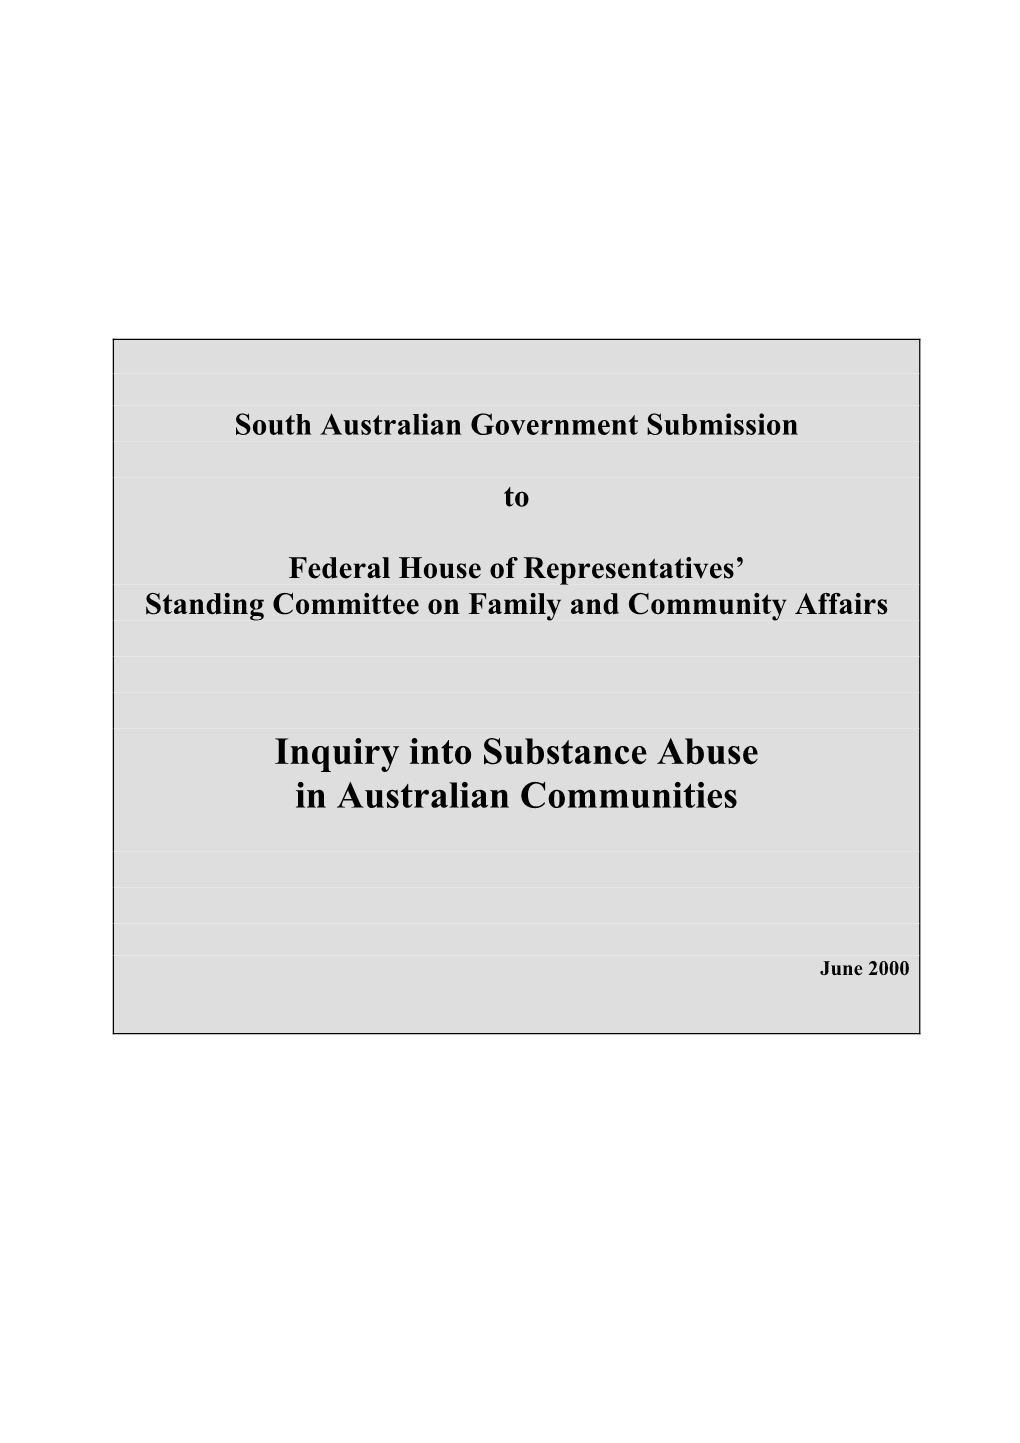 Inquiry Into Substance Abuse in Australian Communities